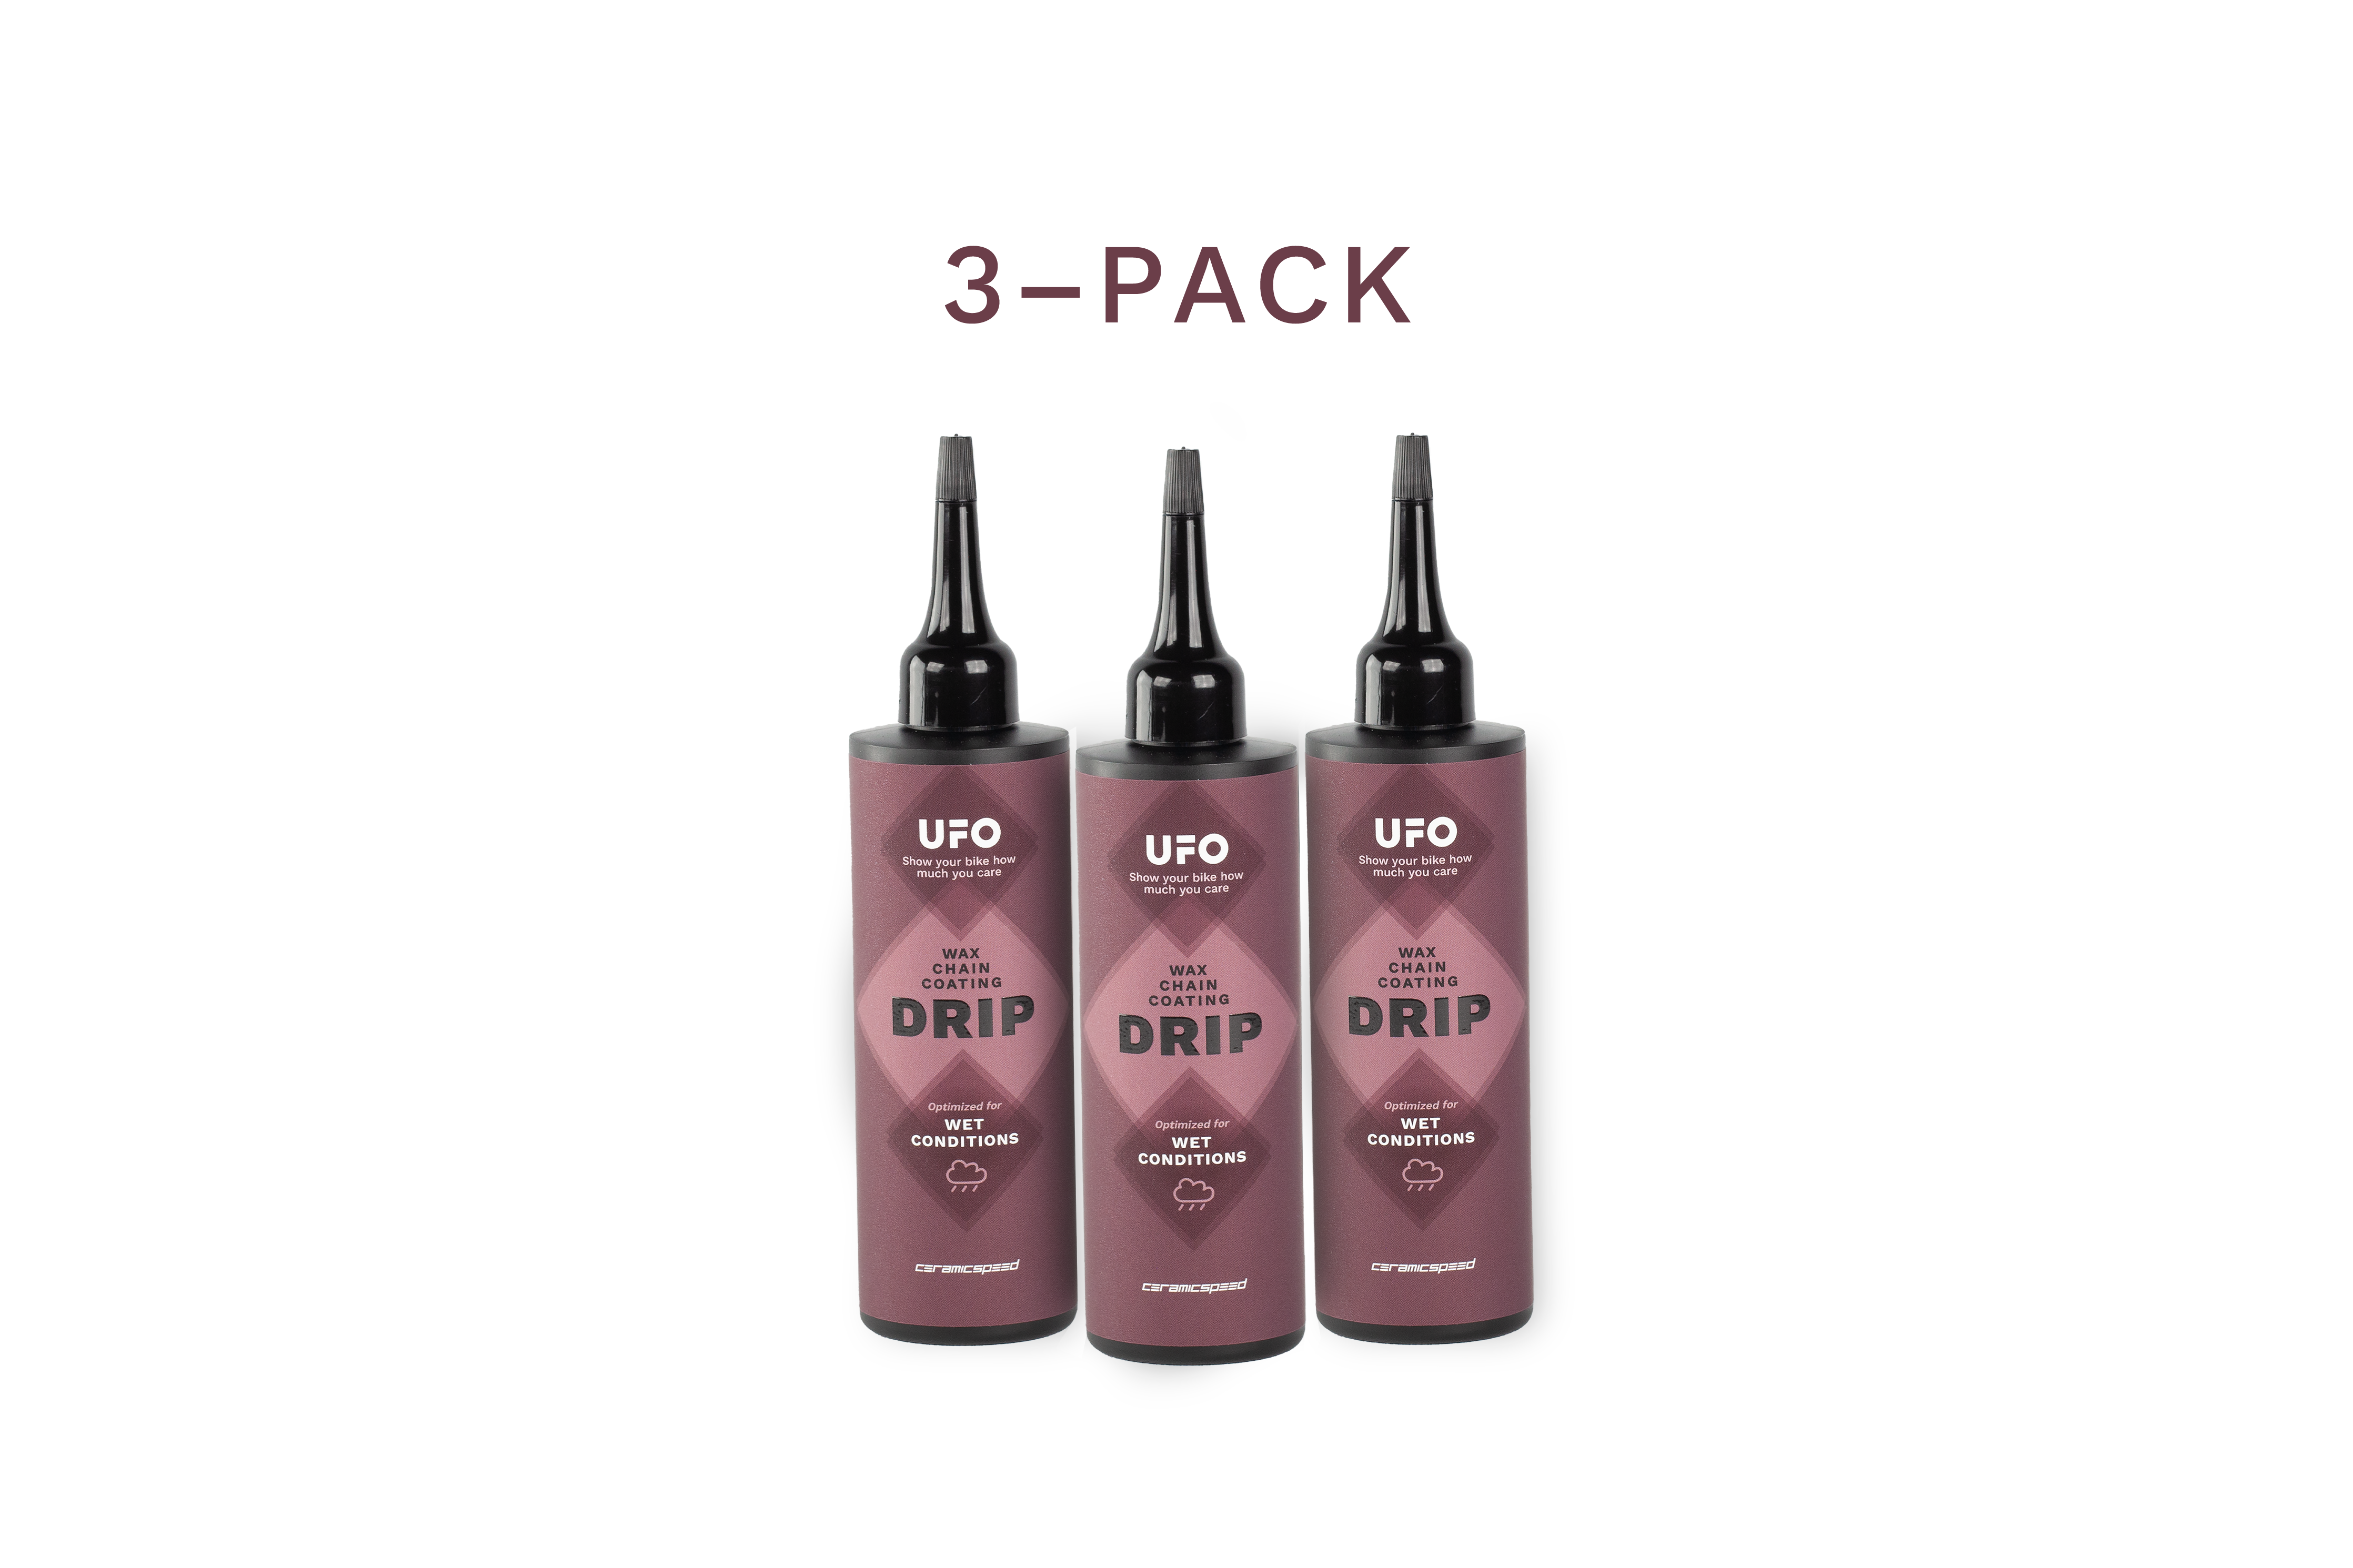 UFO Drip Wet Conditions 3-Pack